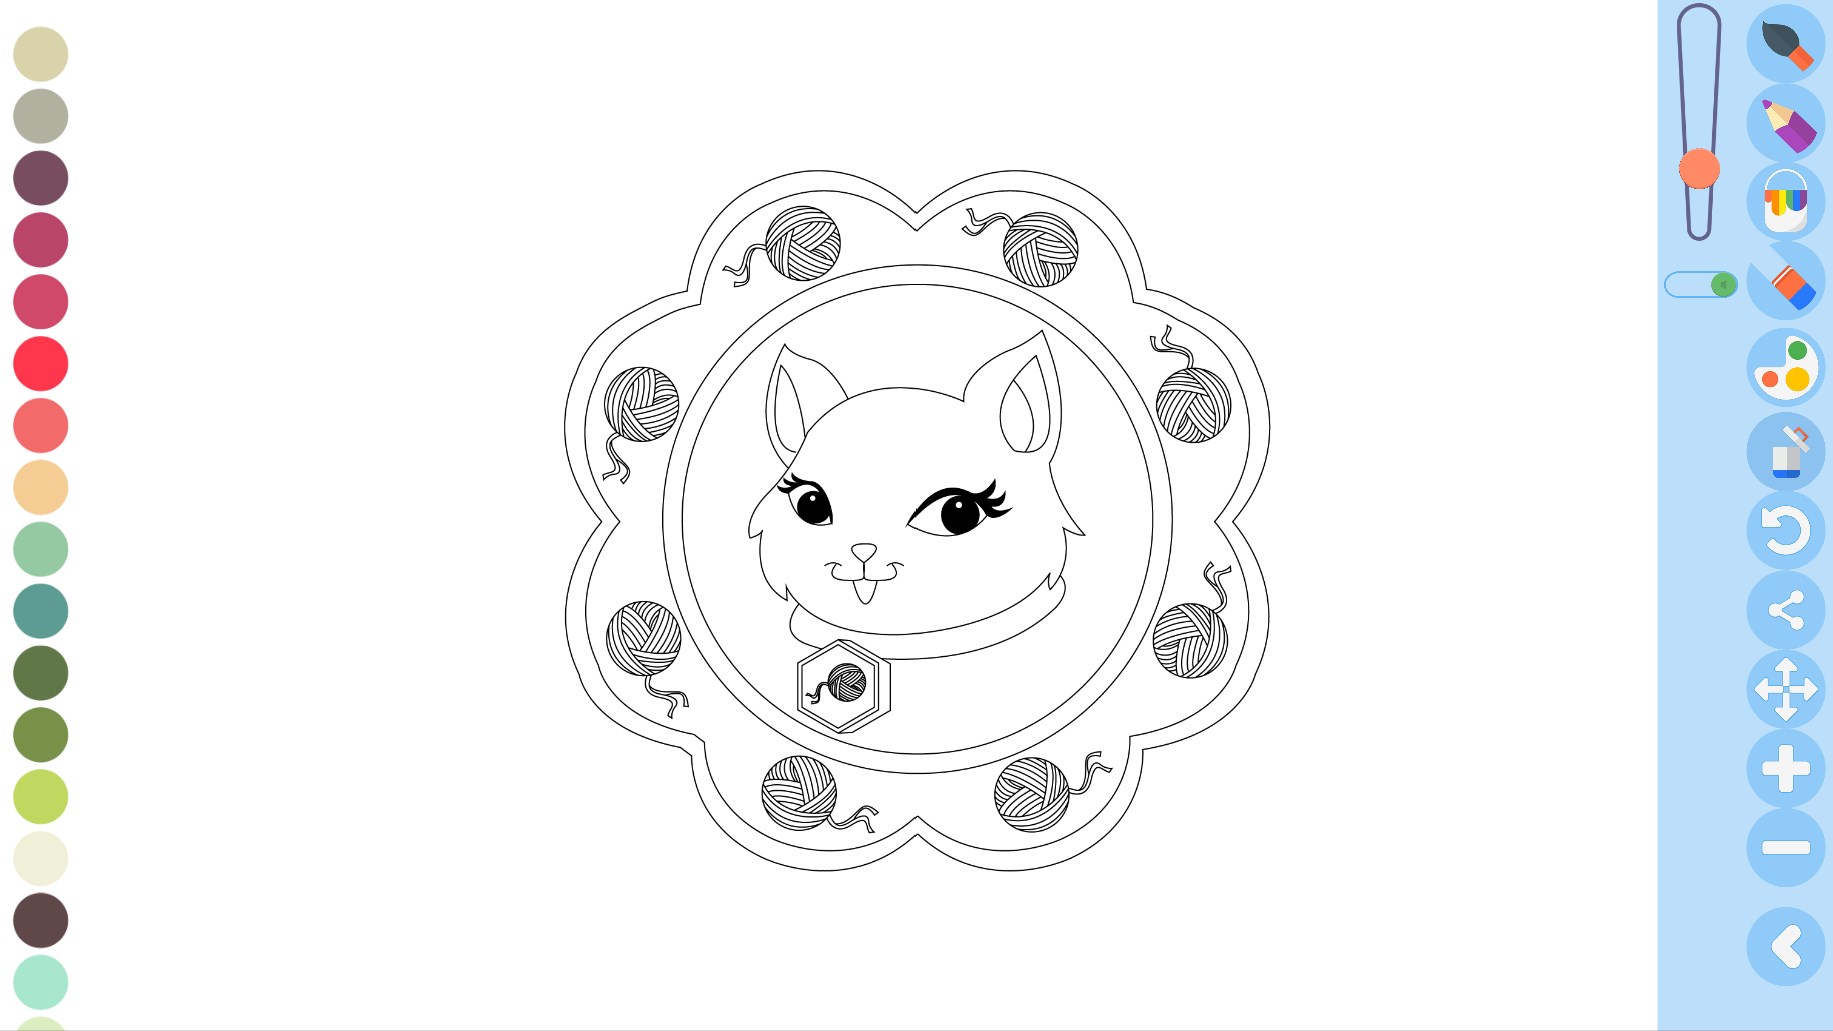 Zen coloring pages for kids   Microsoft Store Applications